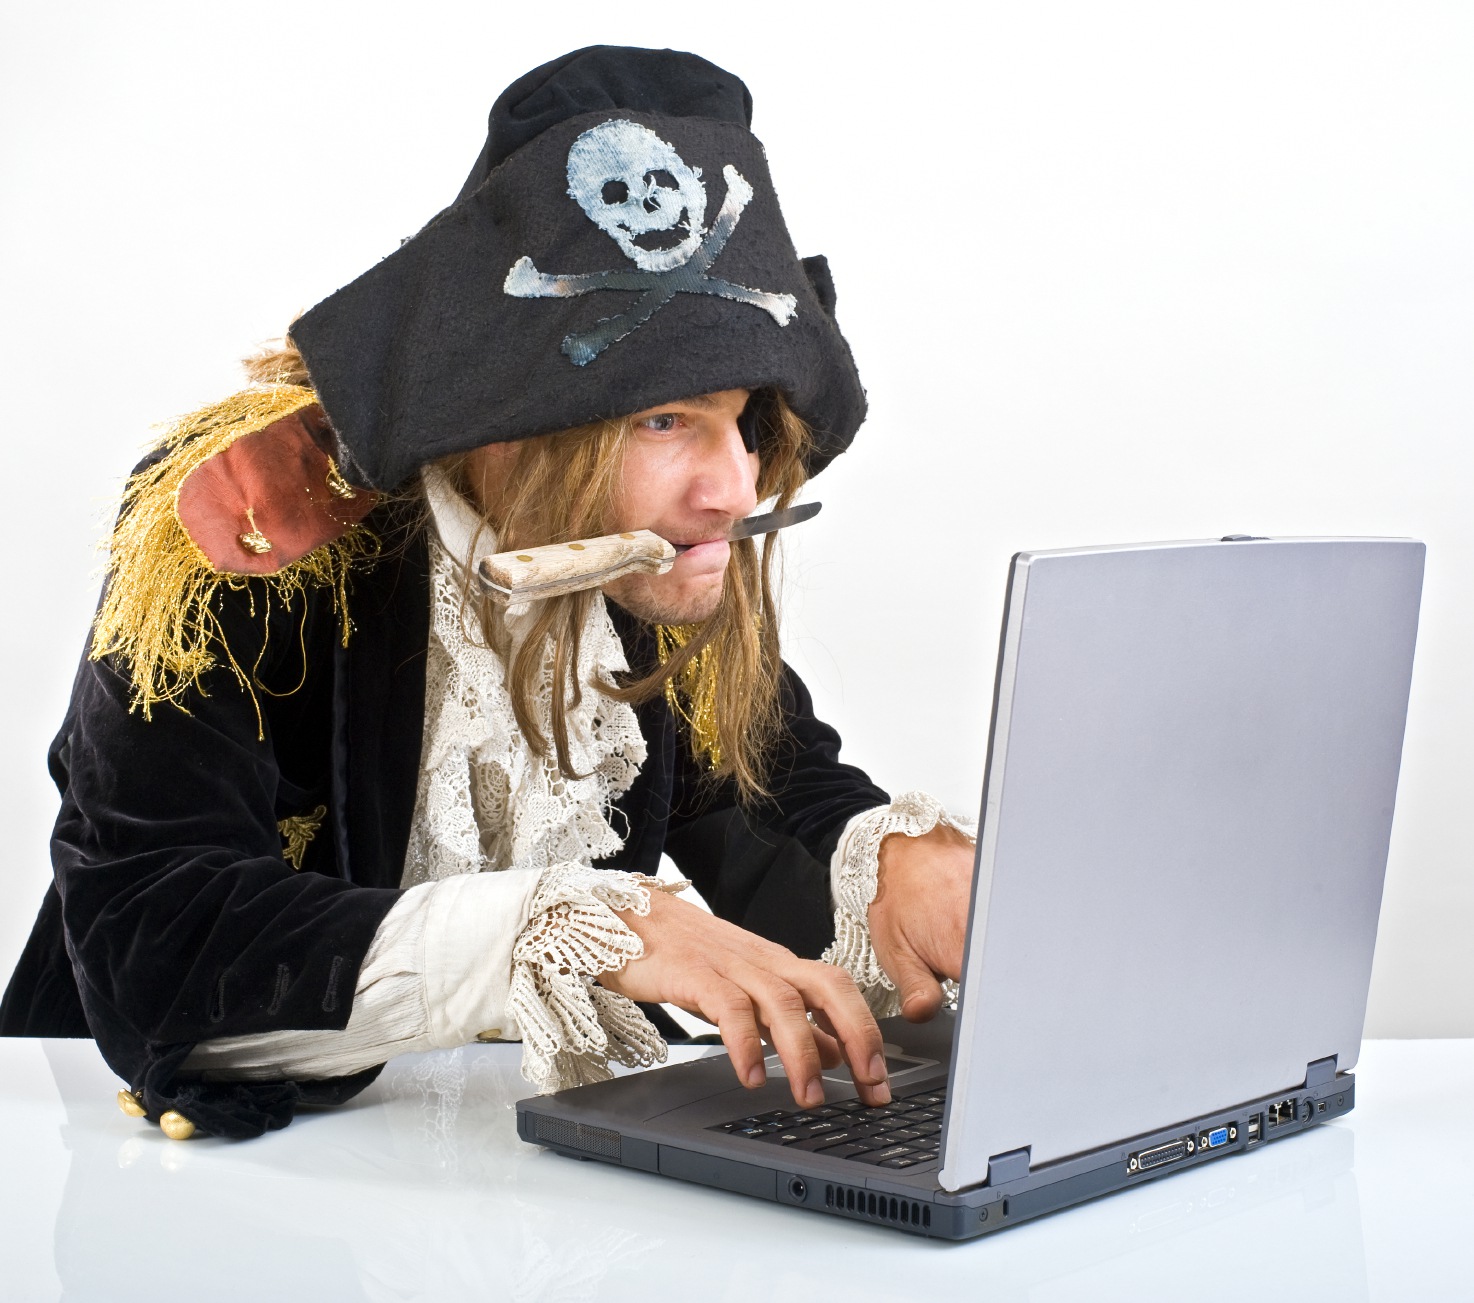 The Moral Dilemma of Pirating